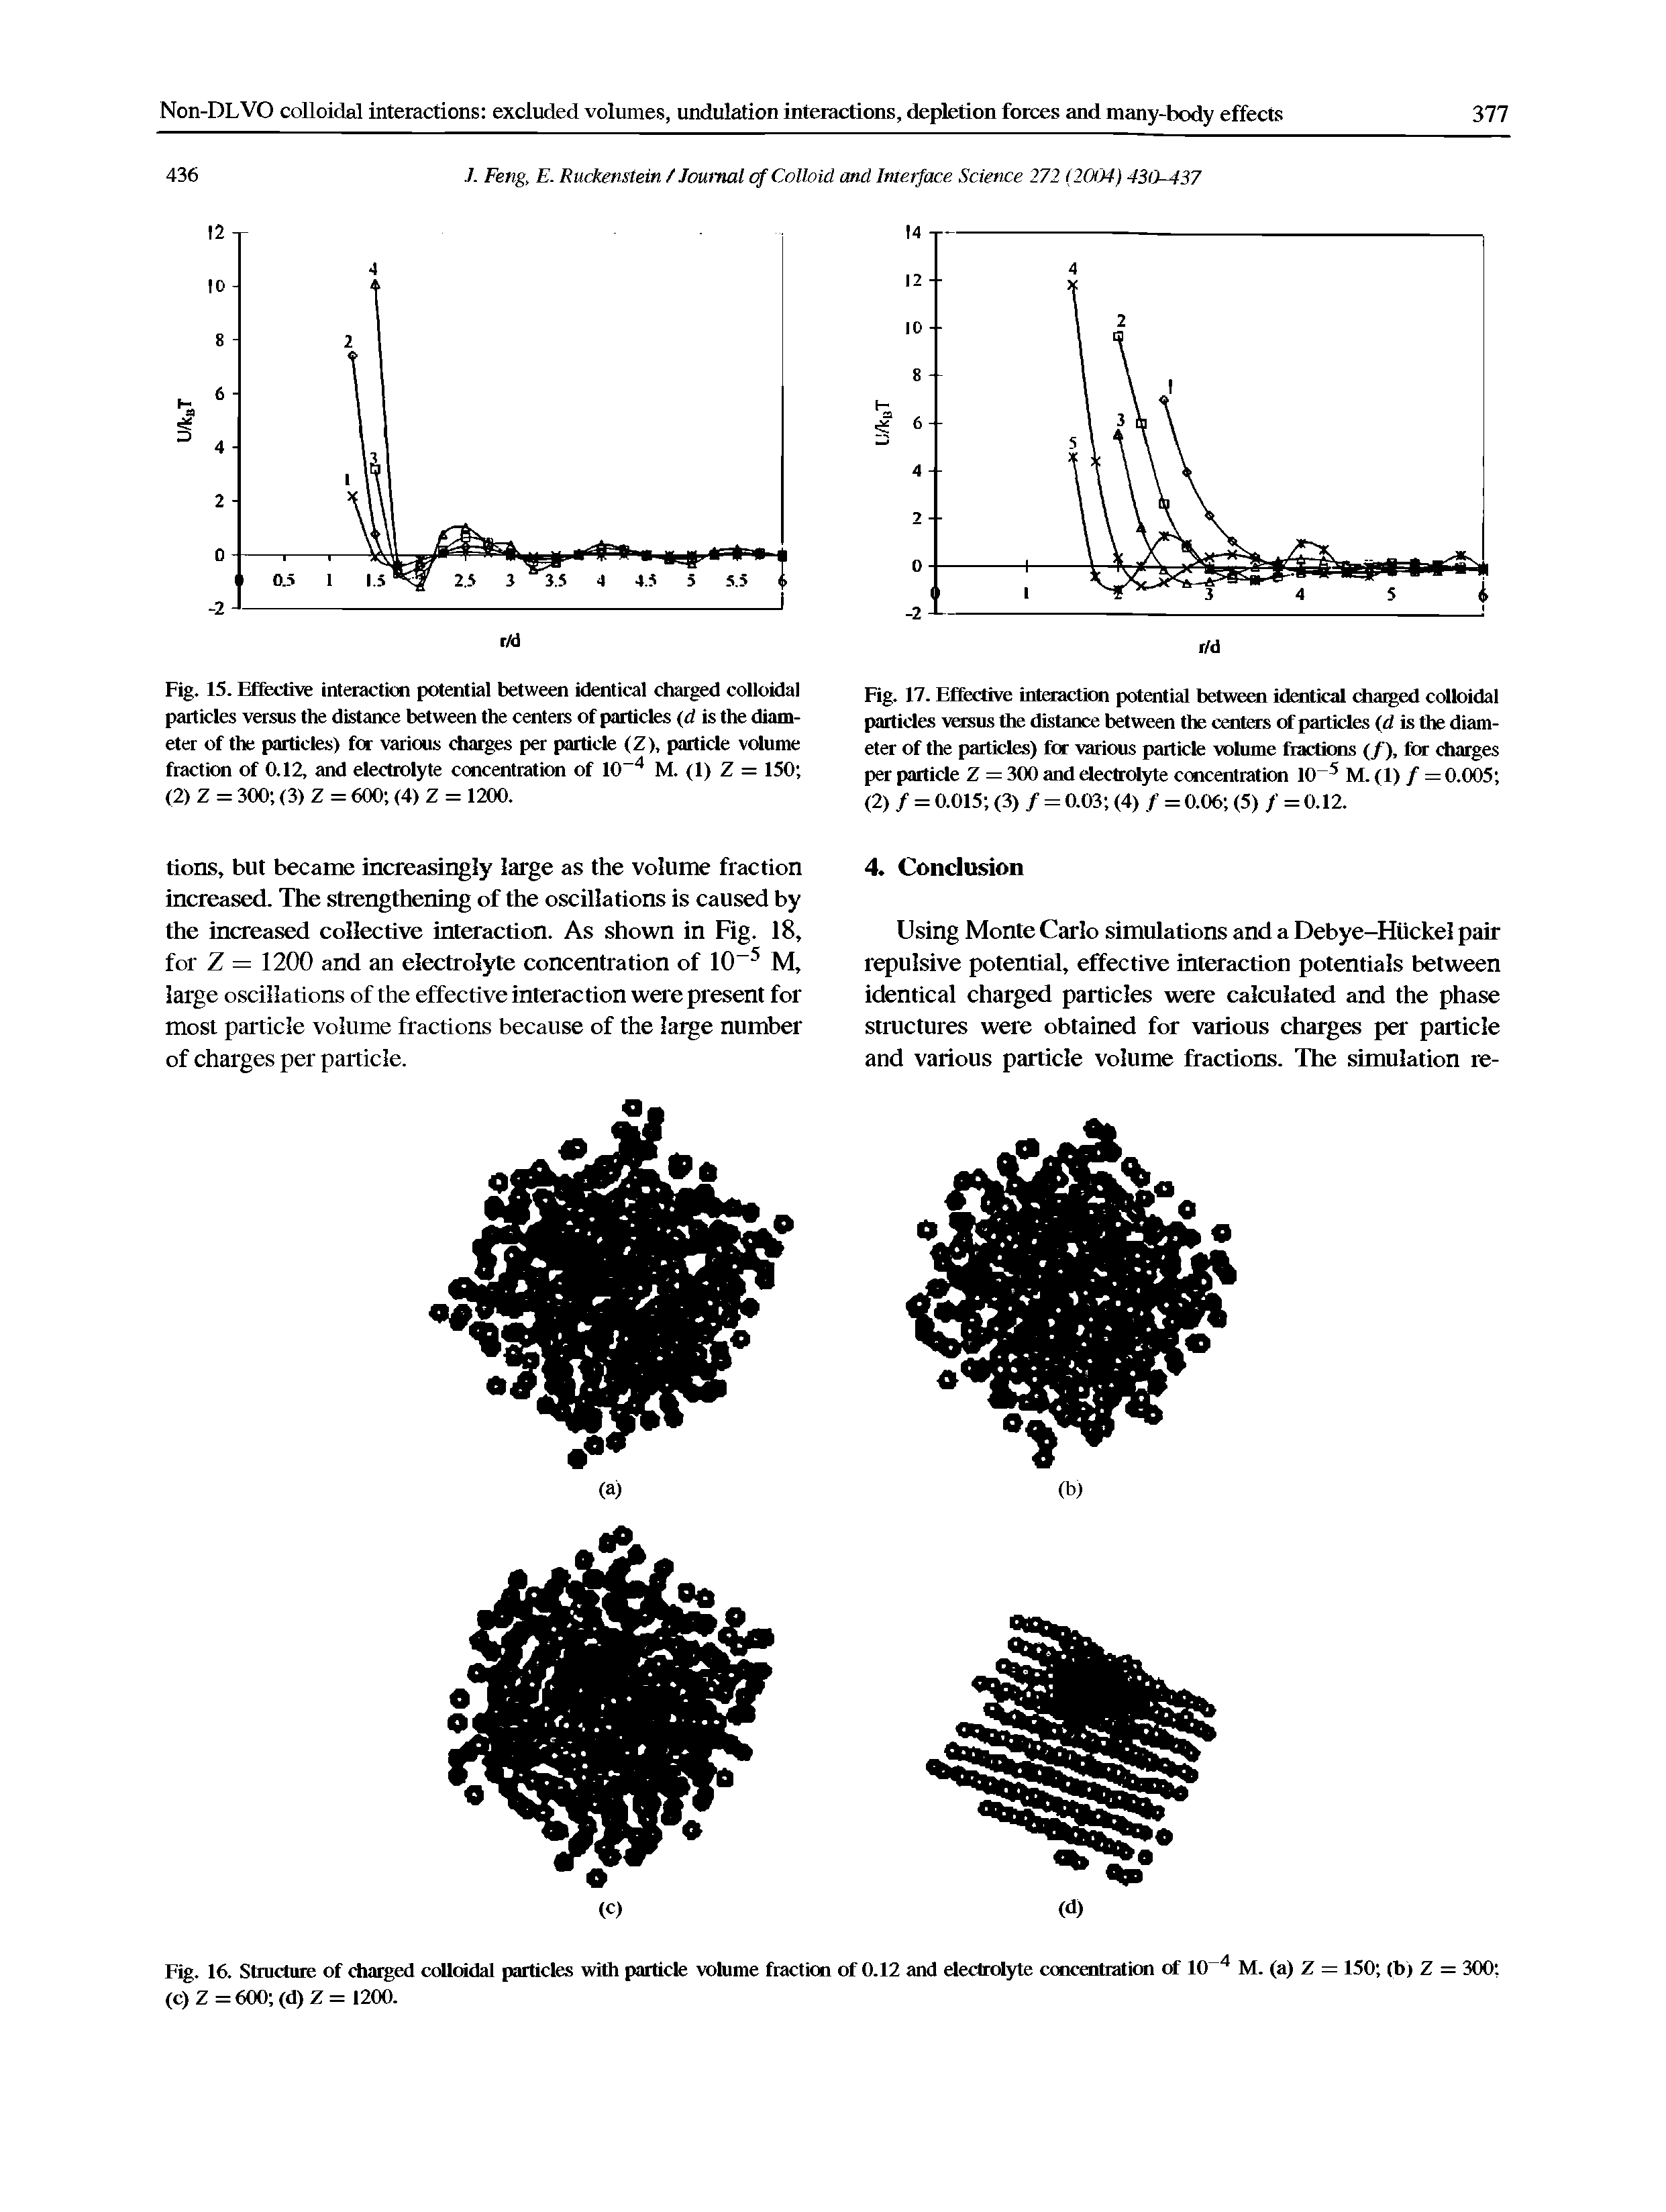 Fig. 17. Effective interaction potential between identical charged colloidal particles versus the distance between the centers of particles (d is the diameter of the particles) for various particle volume fractions (/), for charges per particle Z = 300 and electrolyte concentration 10 5 M. (1) / = 0.005 (2) / = 0.015 (3) / = 0.03 (4) / = 0.06 (5) / = 0.12.